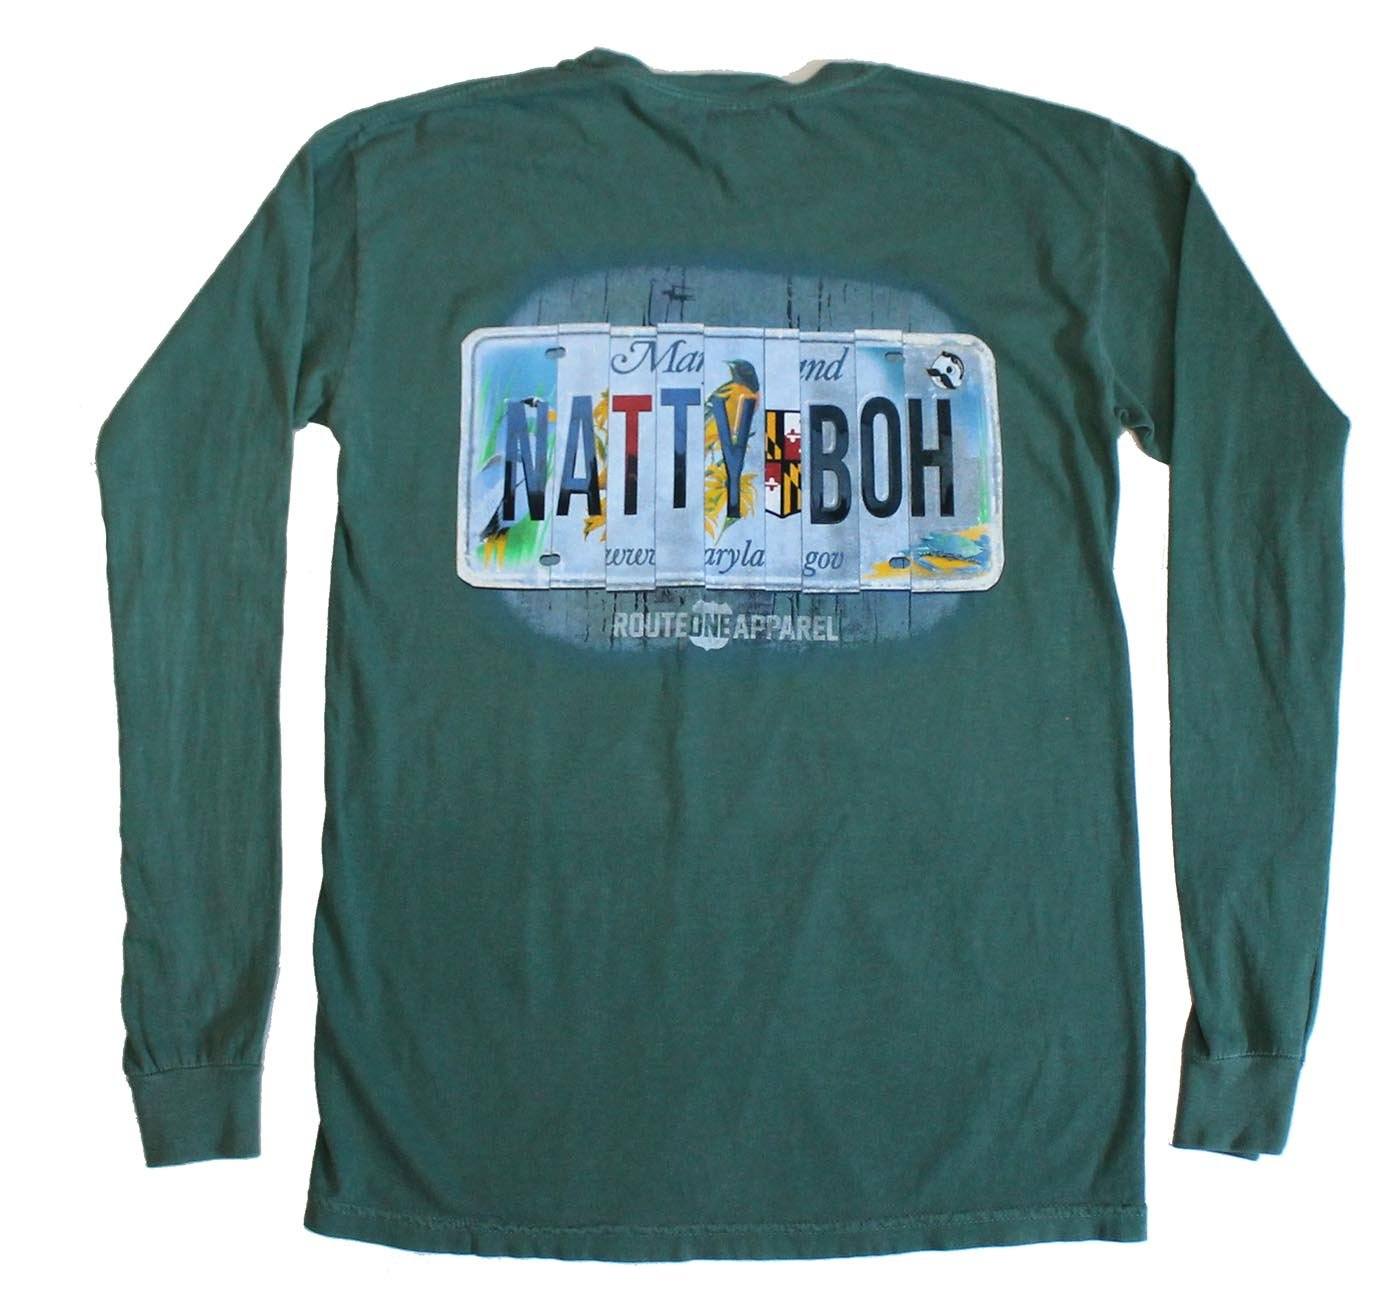 Natty Boh License Plate (Light Green) / Long Sleeve Shirt - Route One Apparel